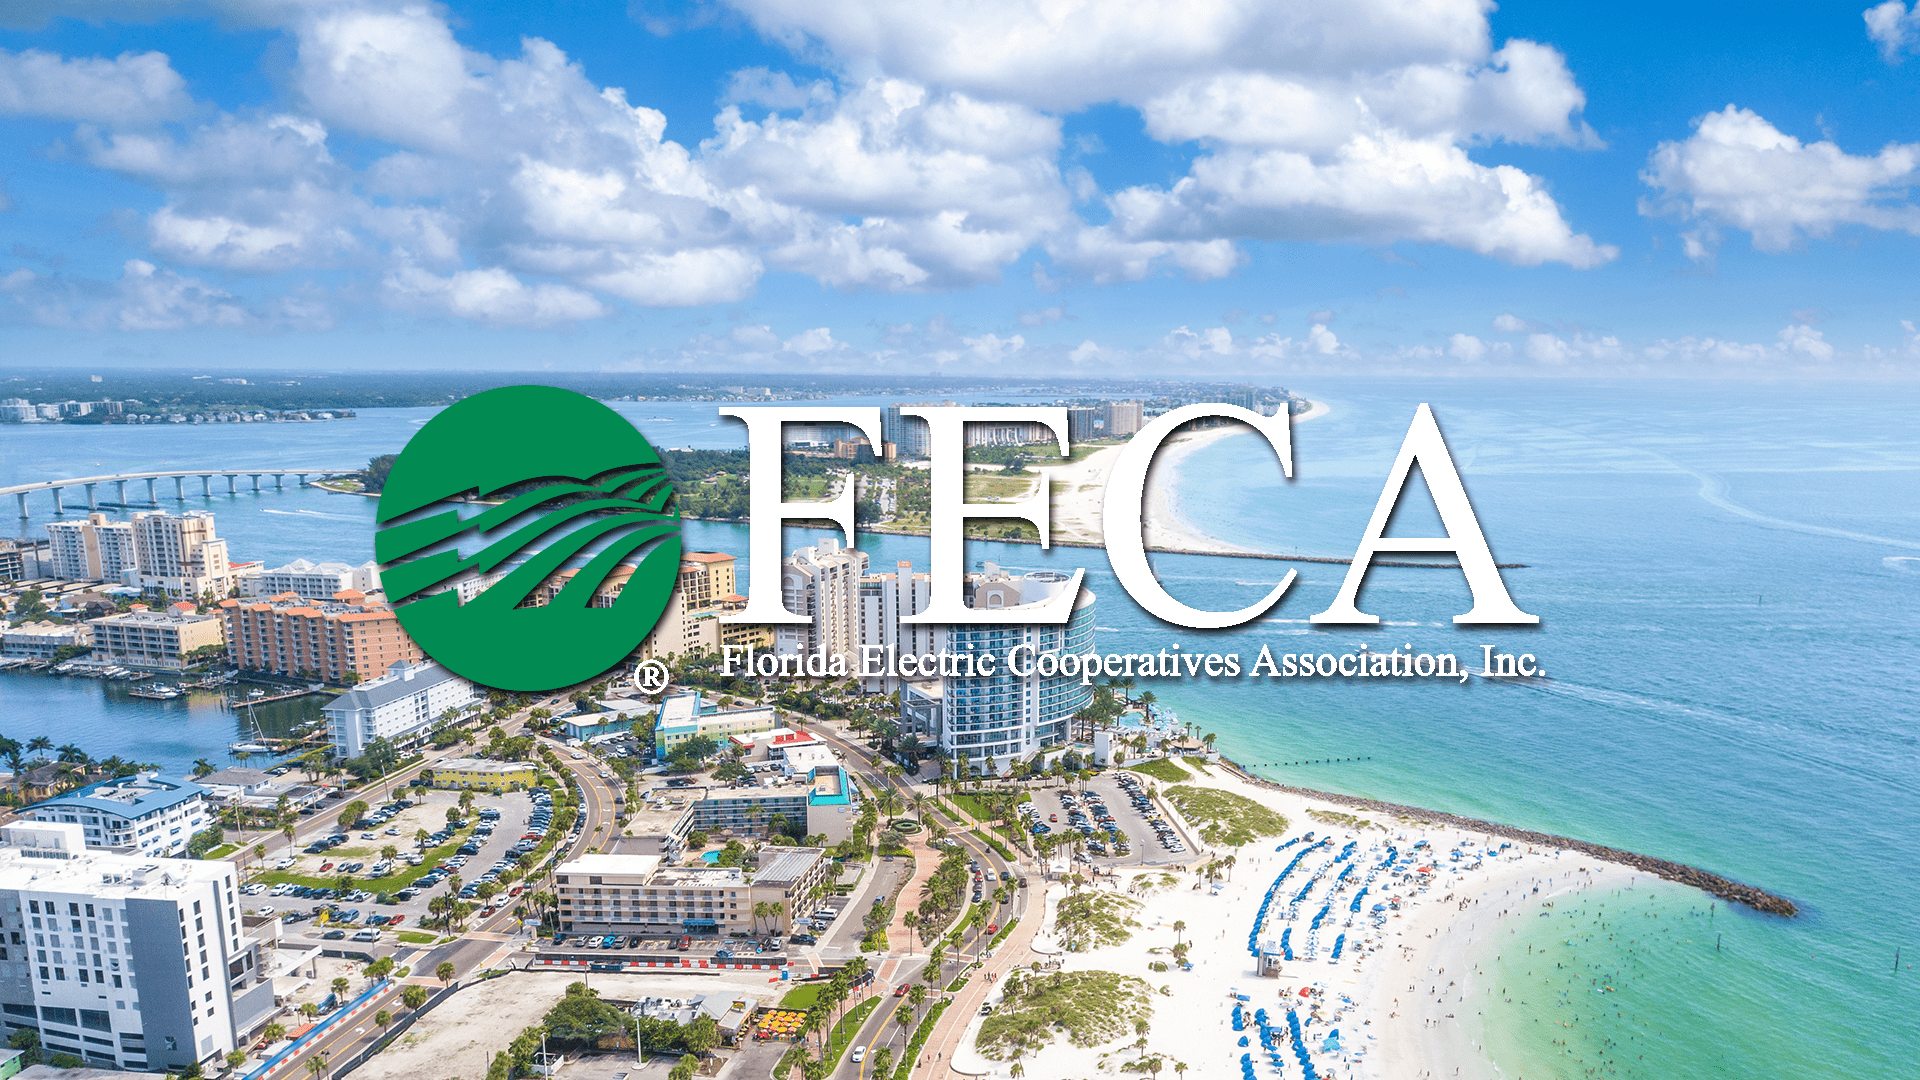 Florida Electric Cooperatives Assoc. Summer Leadership Conference, Clearwater Beach, FL